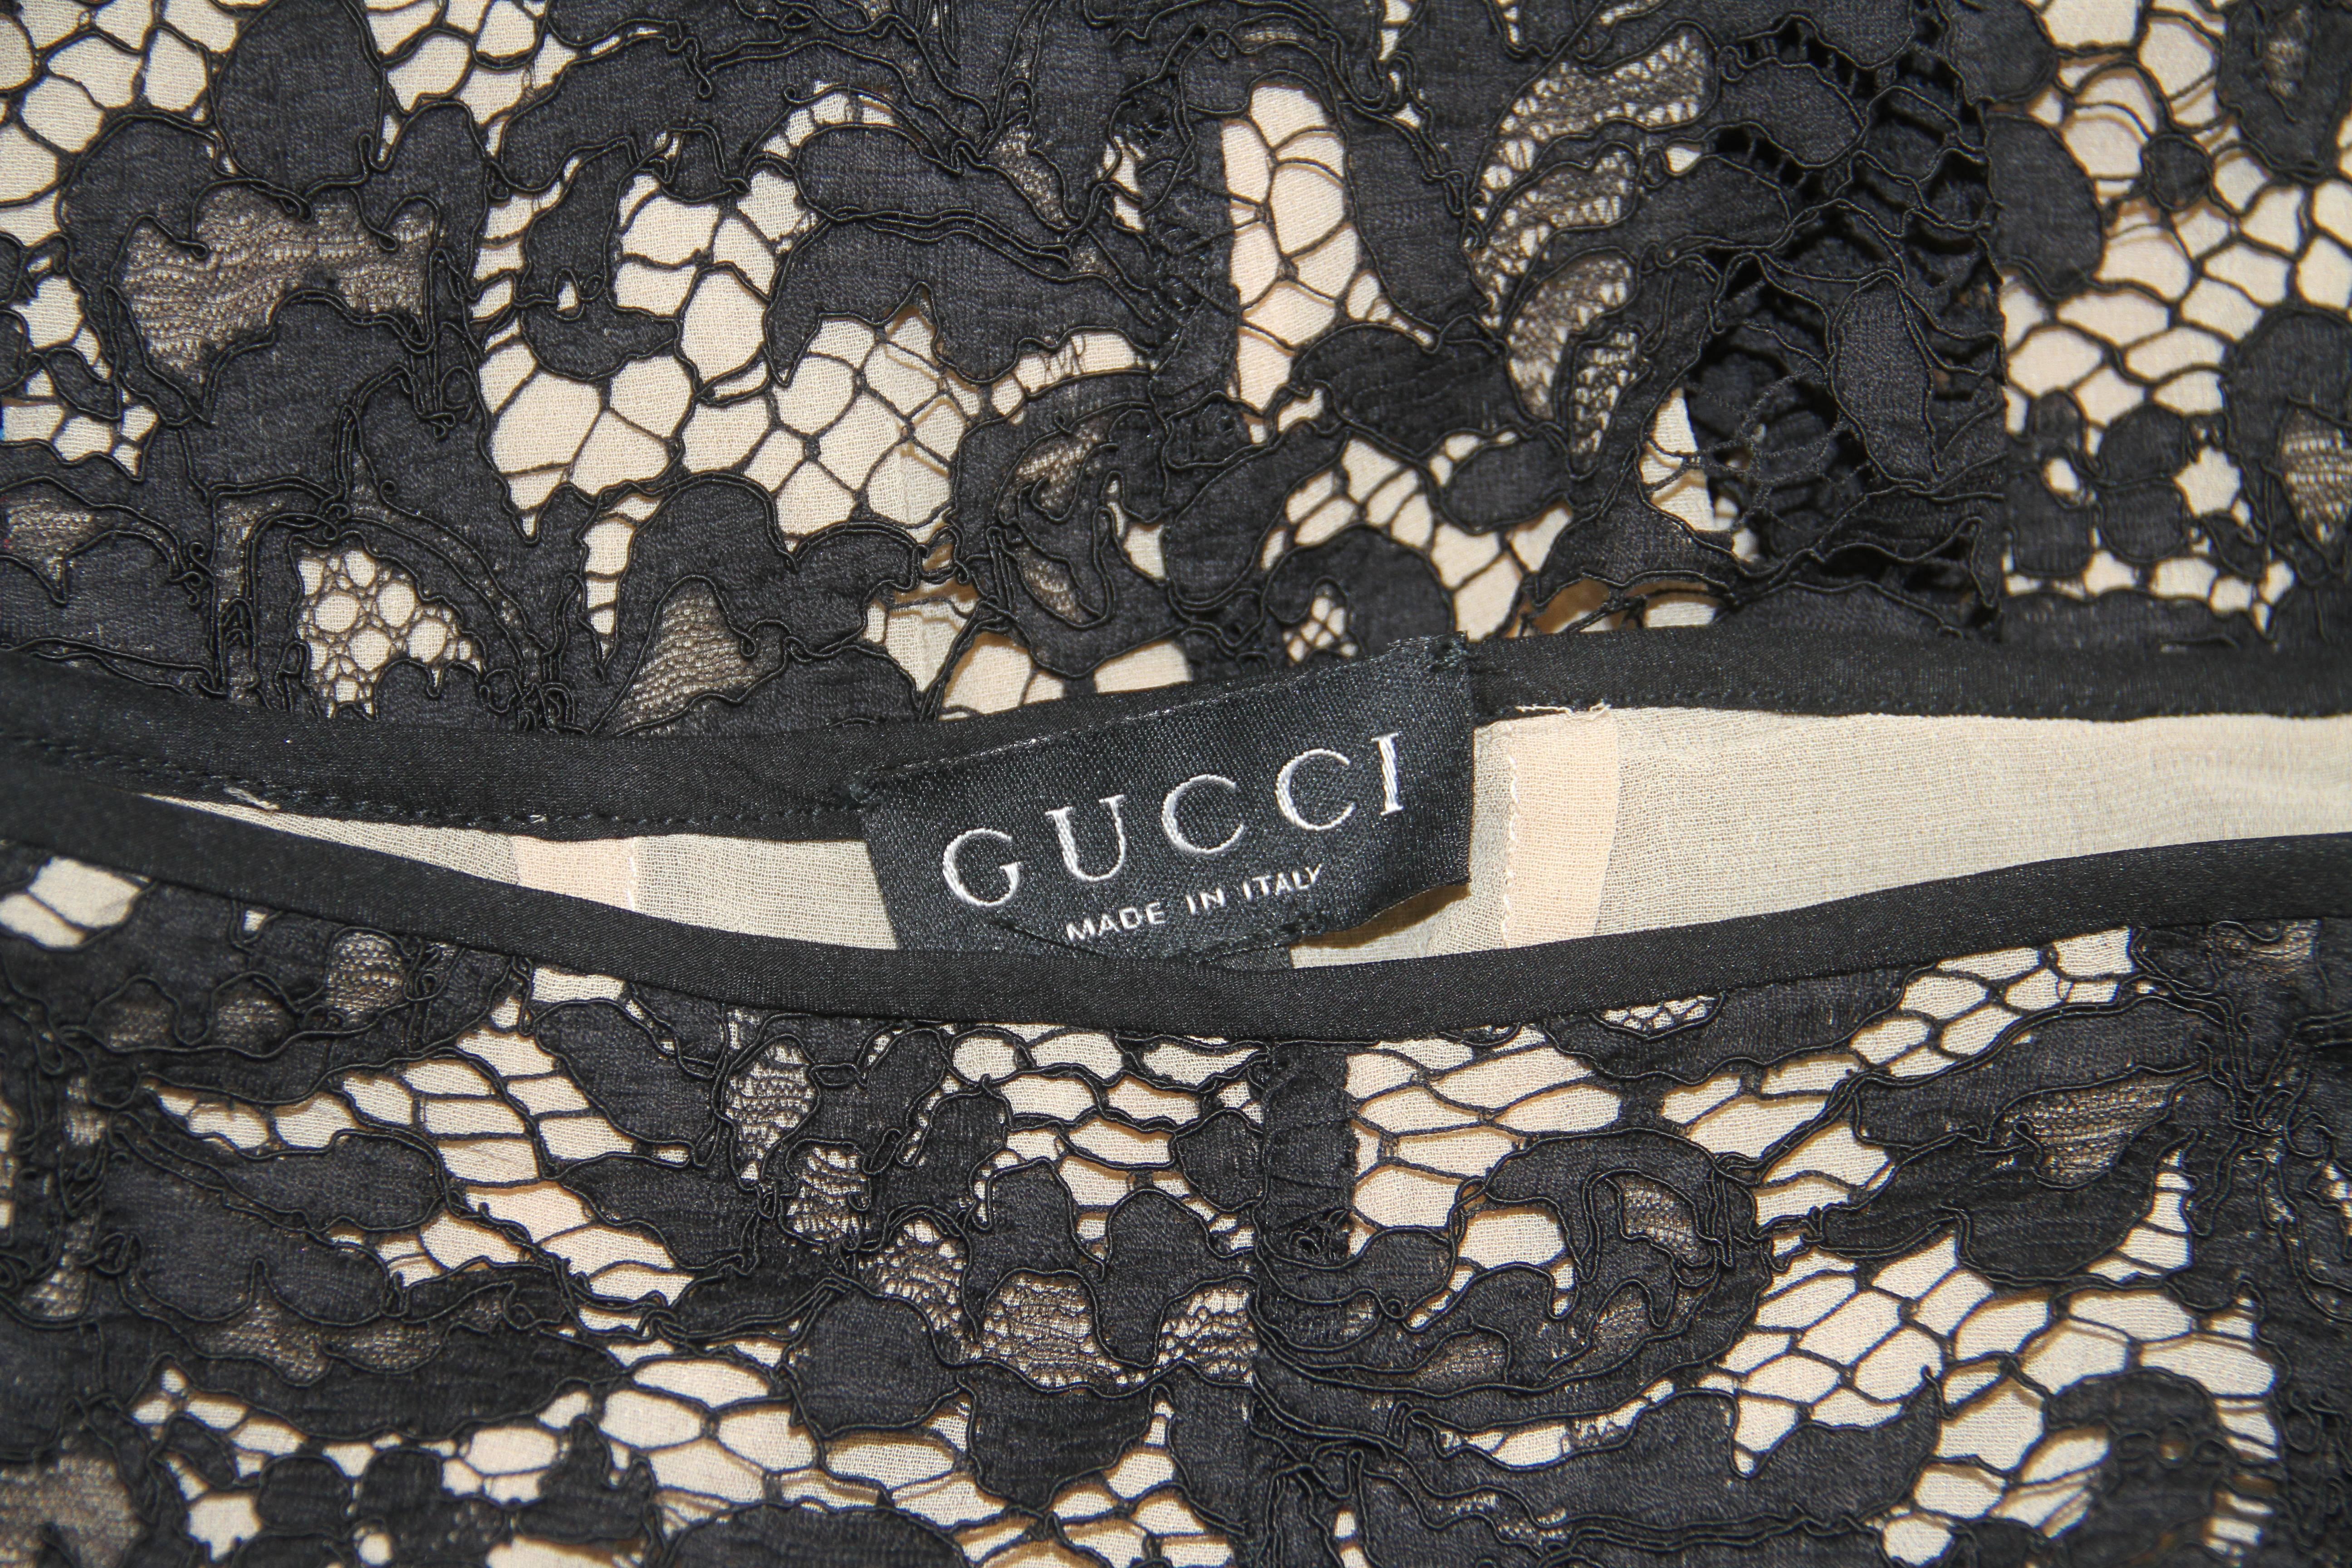 Iconic and rare Tom Ford For Gucci lace pants from the Spring 1996 collection.

Marked an Italian size 42. However, the pants run small and fit closer to an Italian size 40.

Manufacturer - Zamasport S.p.a.

Fabric content - 70% cotton / 20%